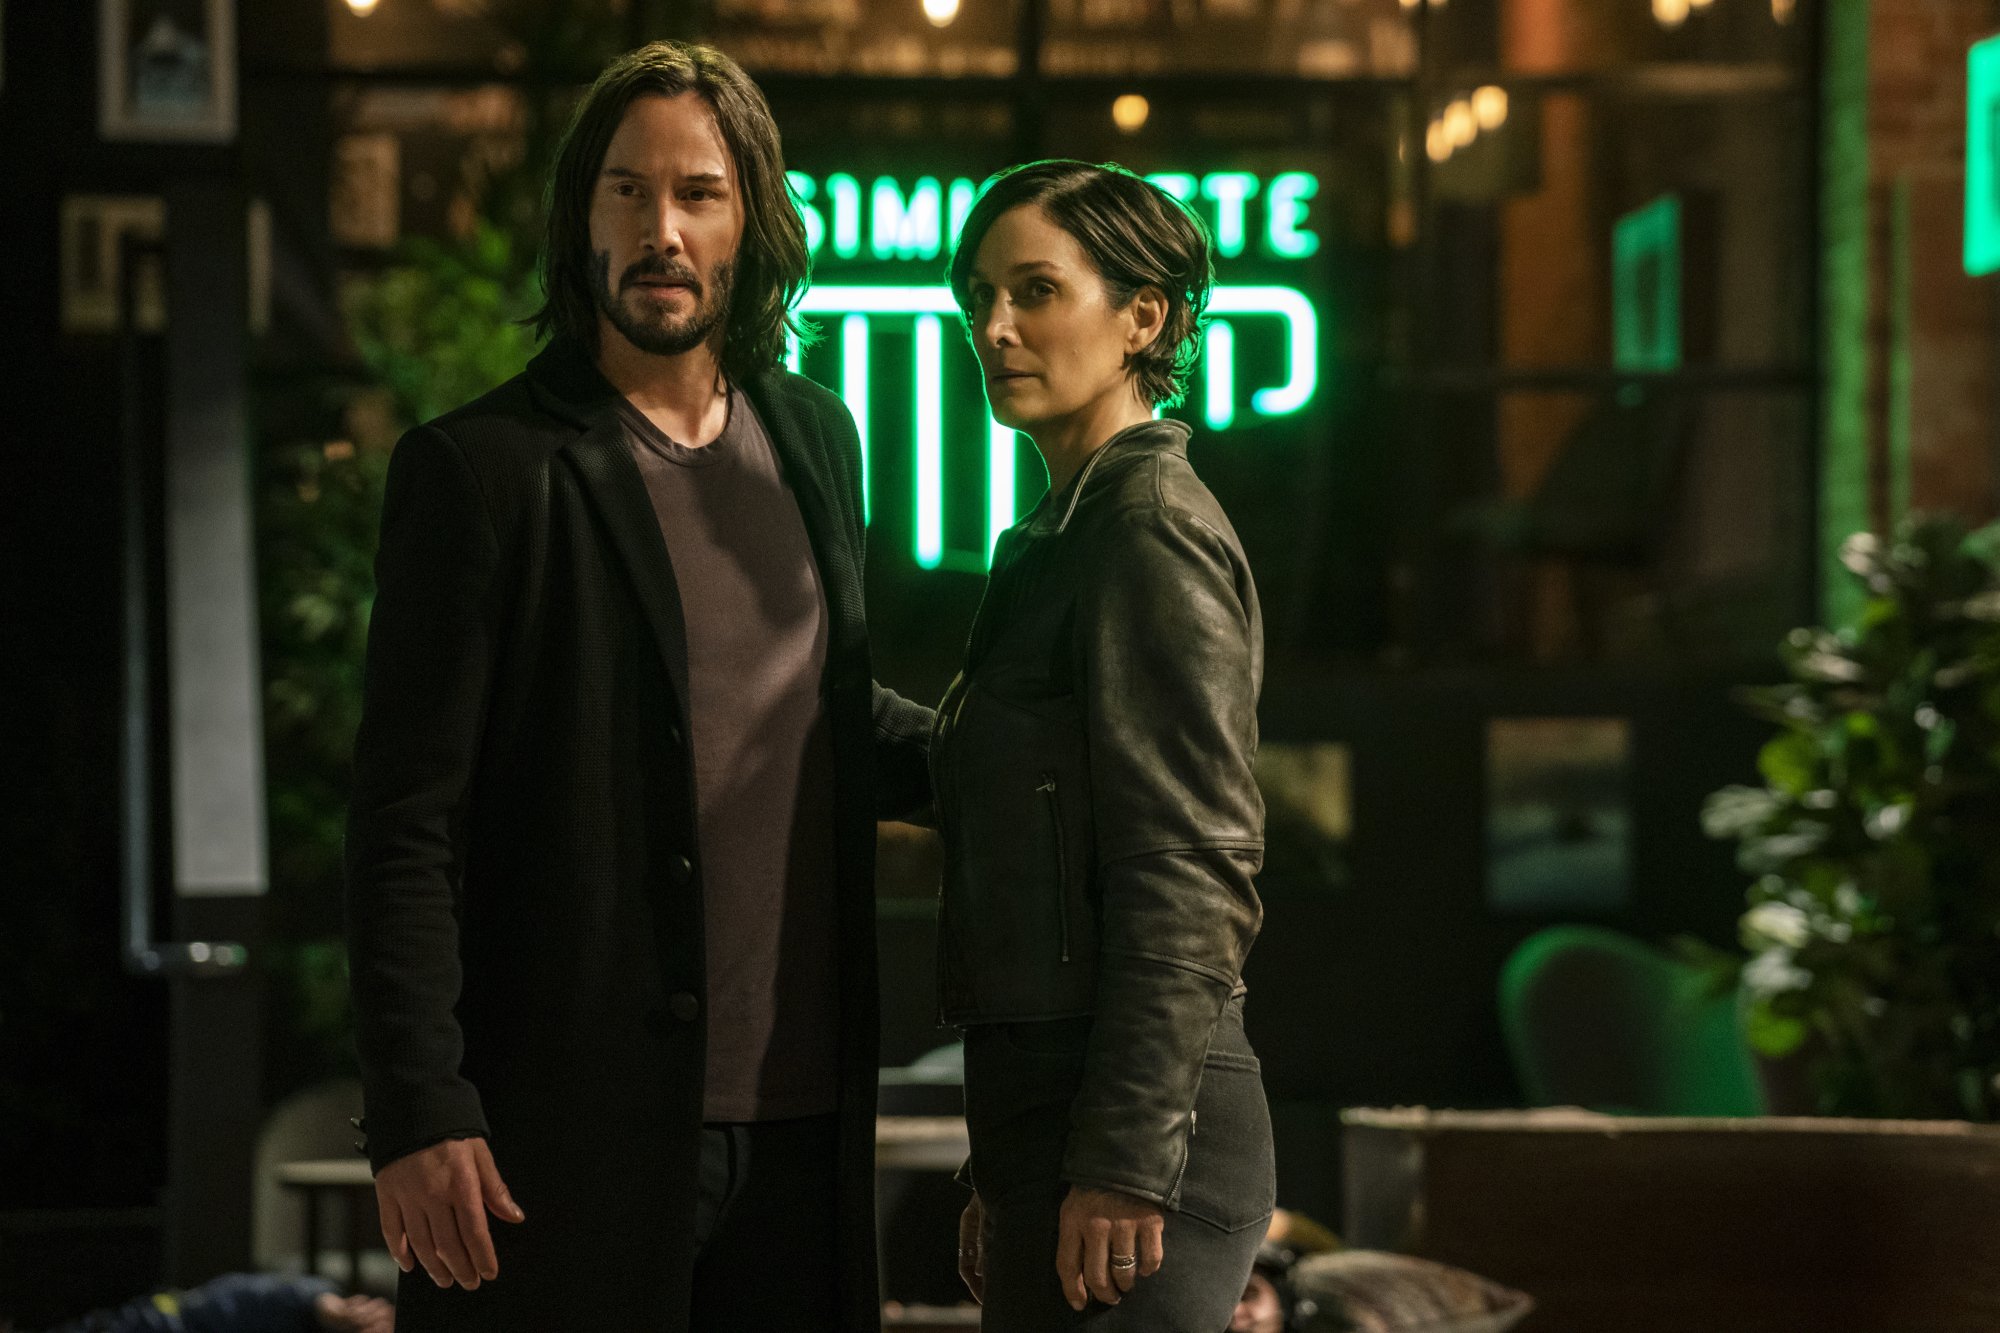 'The Matrix Resurrections' review Keanu Reeves as Neo/Thomas A. Anderson and Carrie-Anne Moss as Trinity/Tiffany standing in front of neon sign